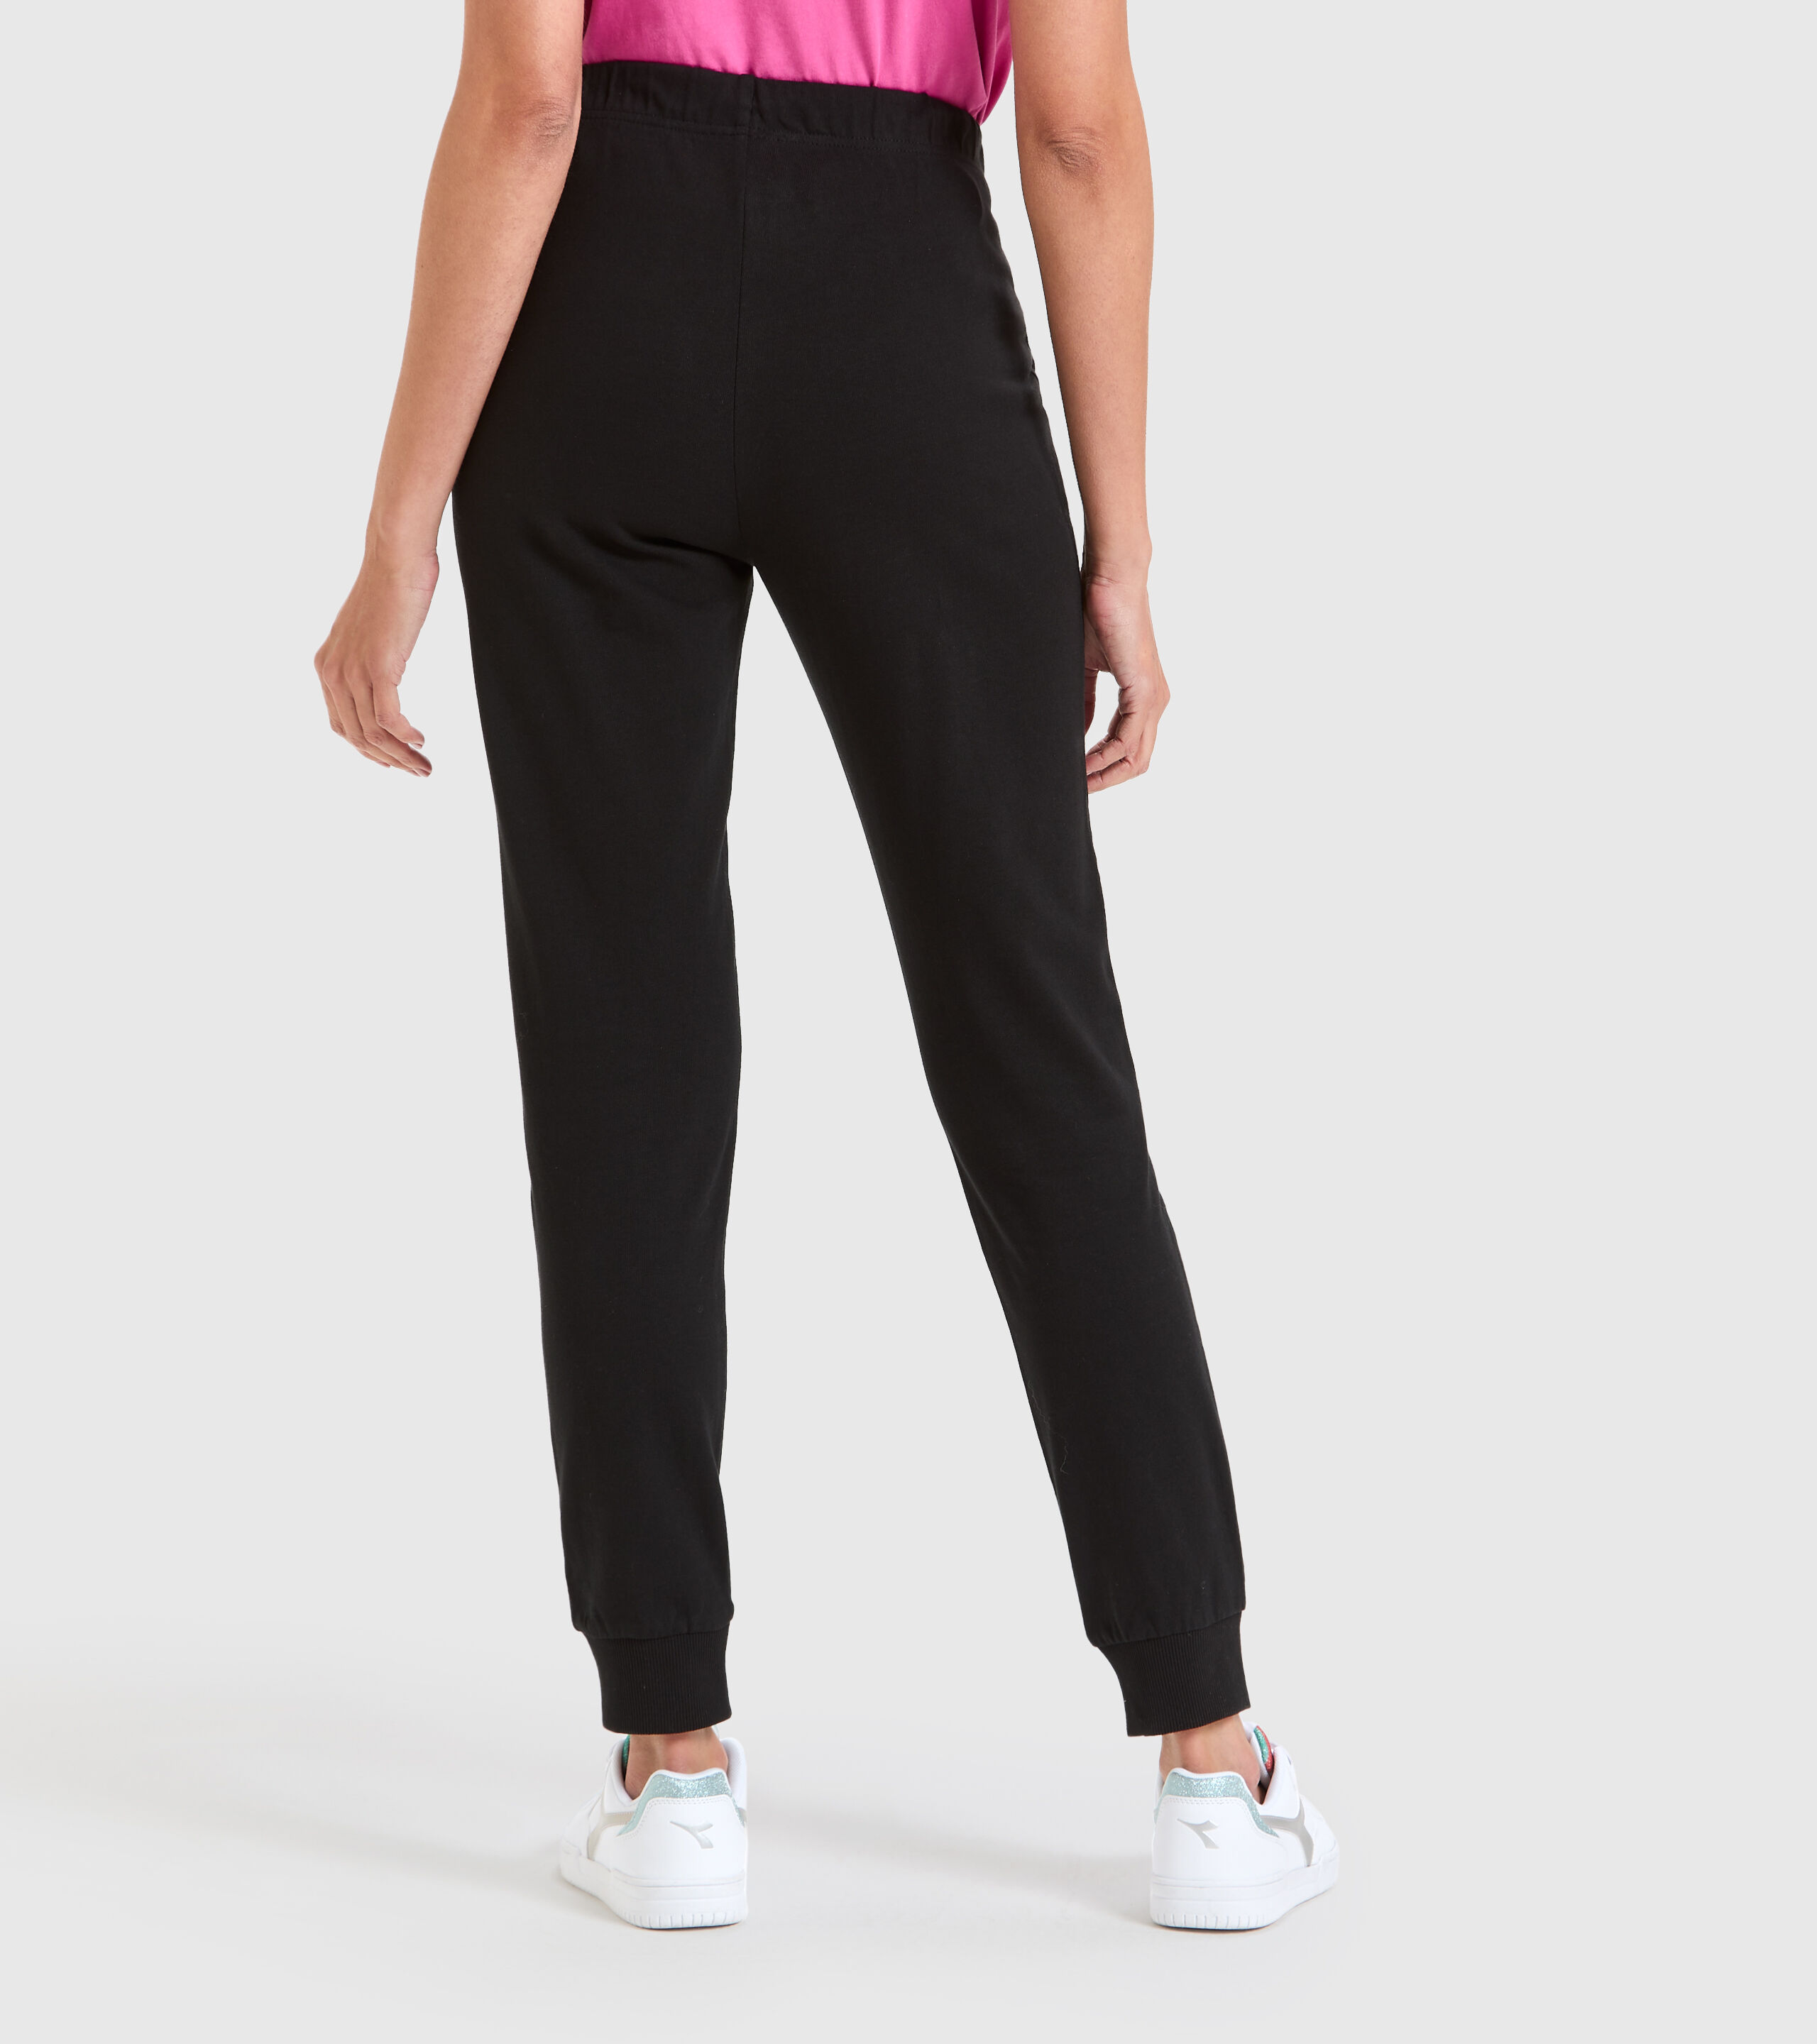 Details about   Diadora Sport Women's L 3/4 Length Tight Running Trousers Black/Teaberry Large 